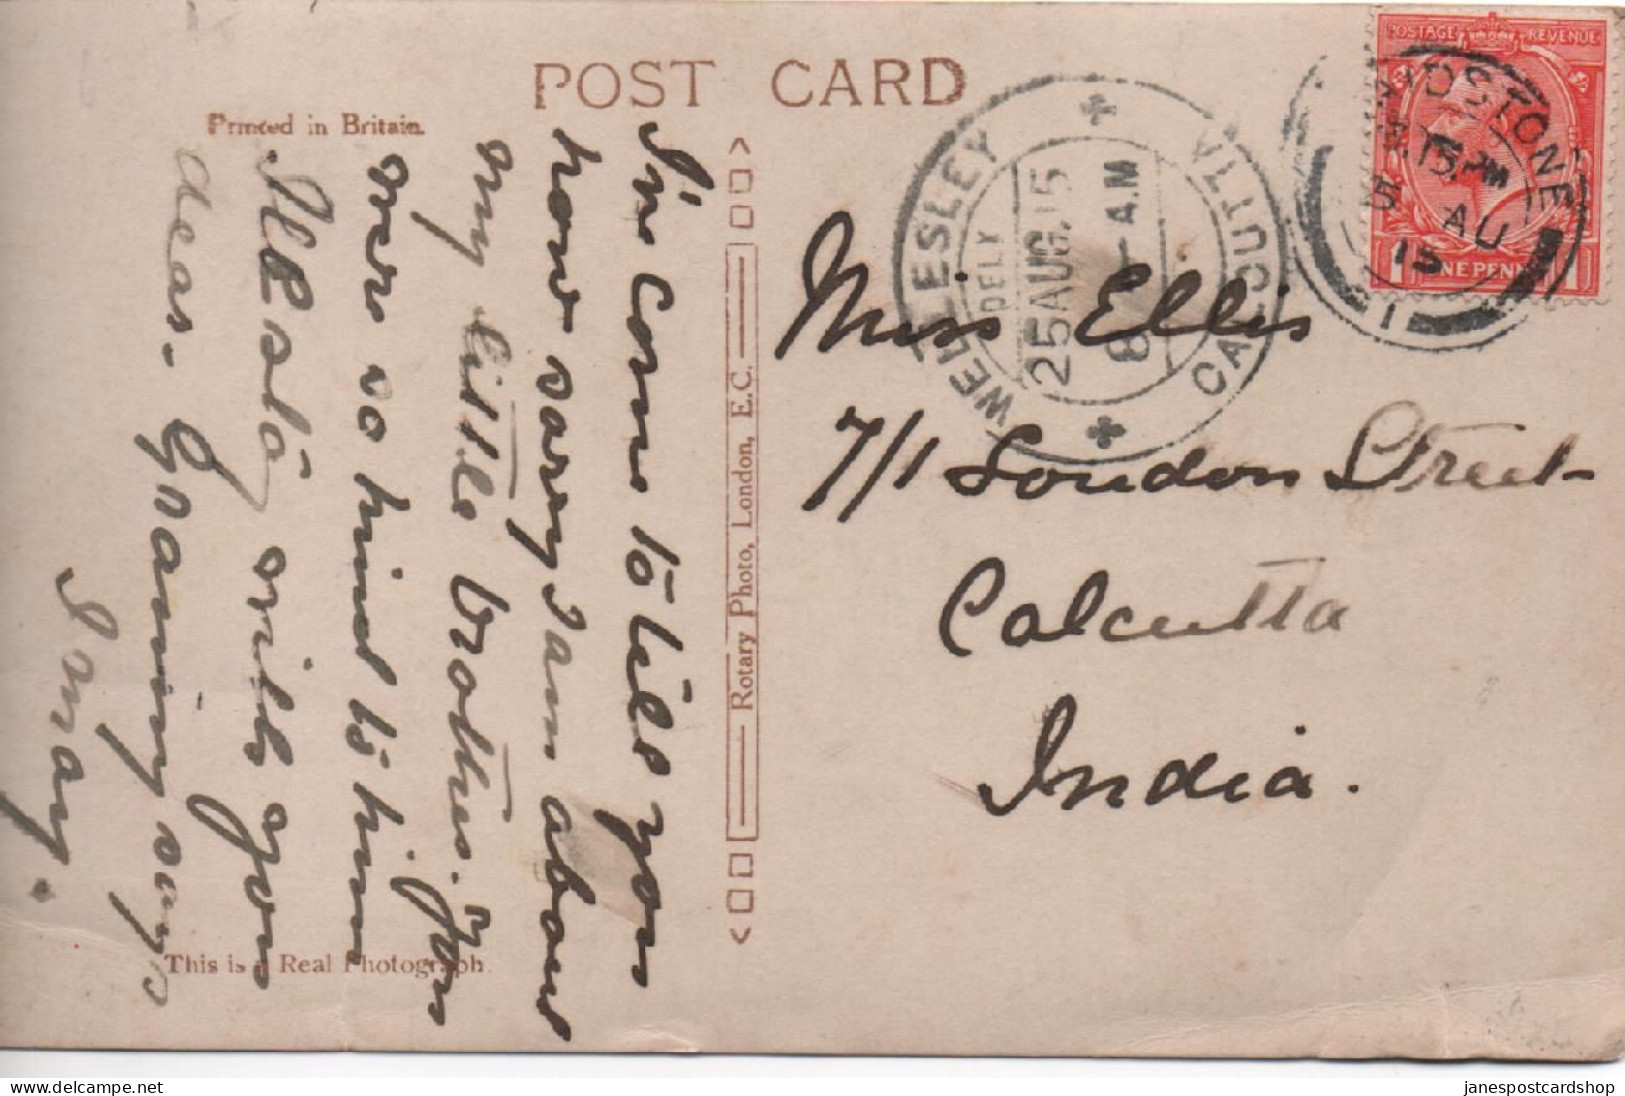 GOOD WELLESLEY CALCUTTA INDIA POSTMARK - ON REAL PHOTOGRAPHIC POSTCARD OF A CAT - Cartes Postales